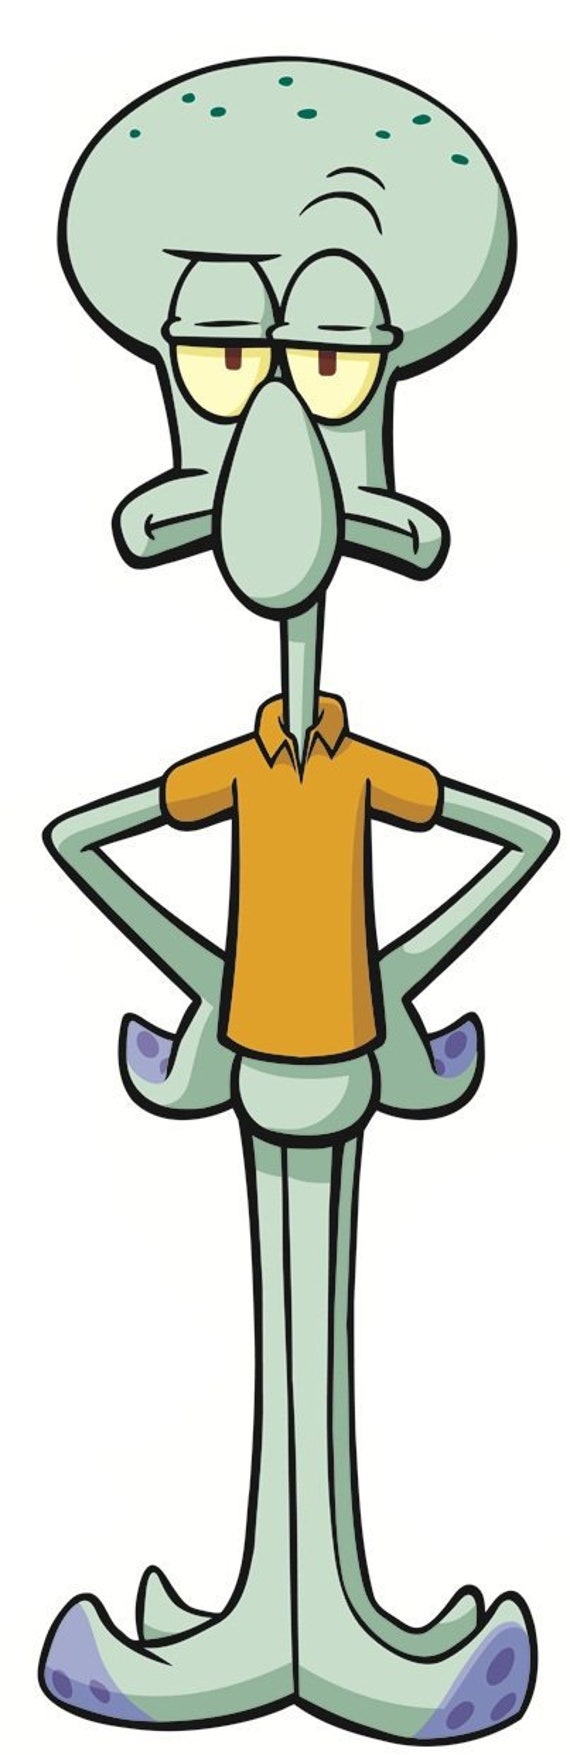 How To Draw Squidward From Spongebob Squarepants 8 St - vrogue.co